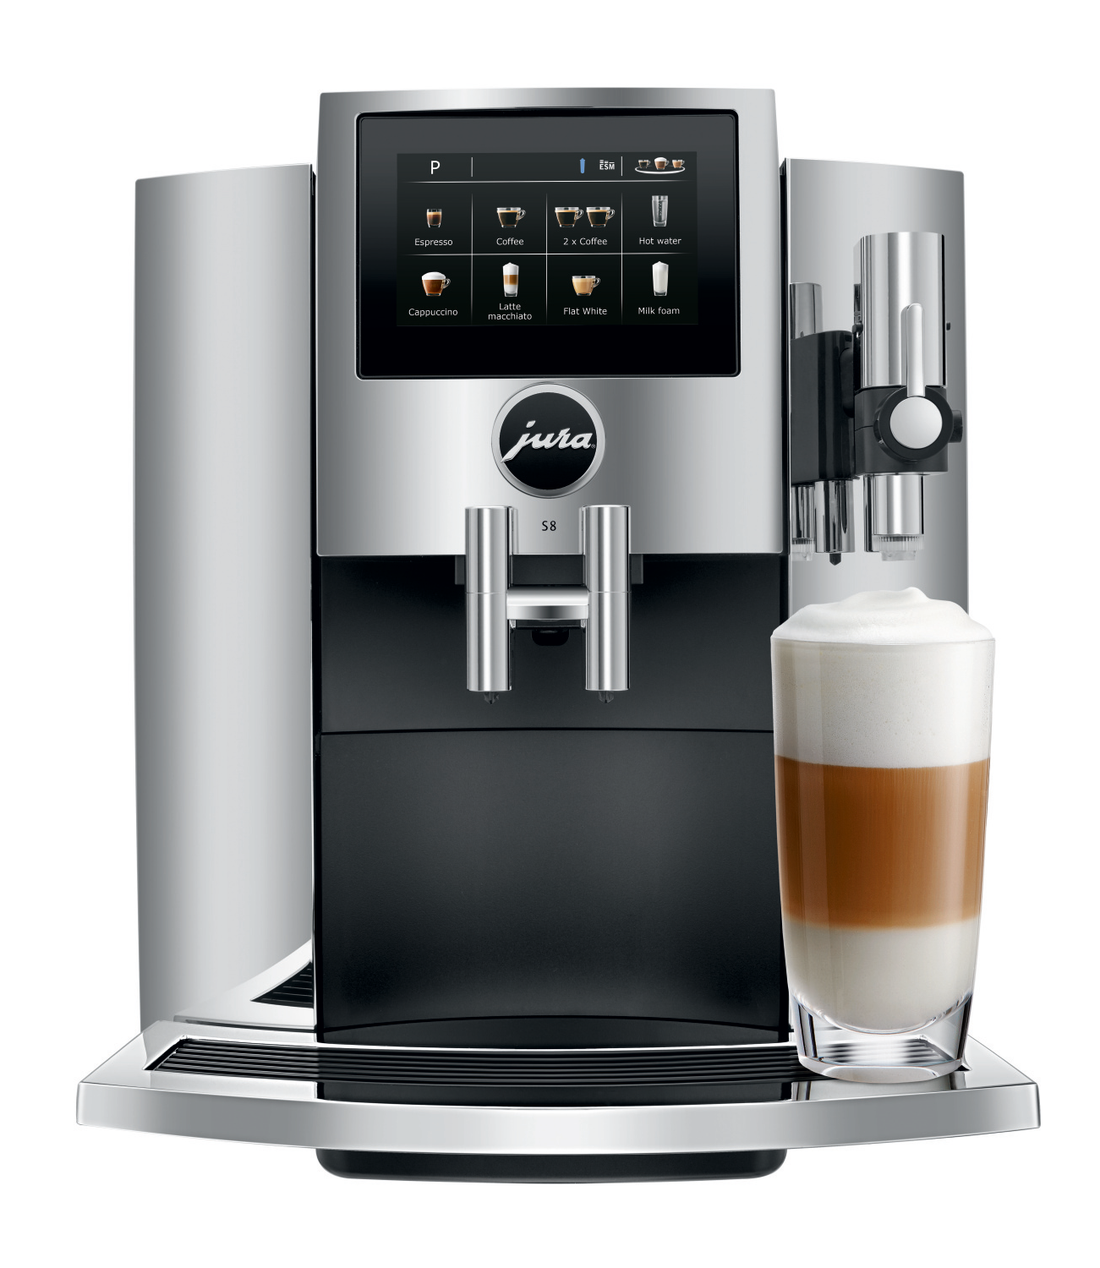 Jura D6 Coffee Machine with Descaling Liquid and 2 Cup and Saucer